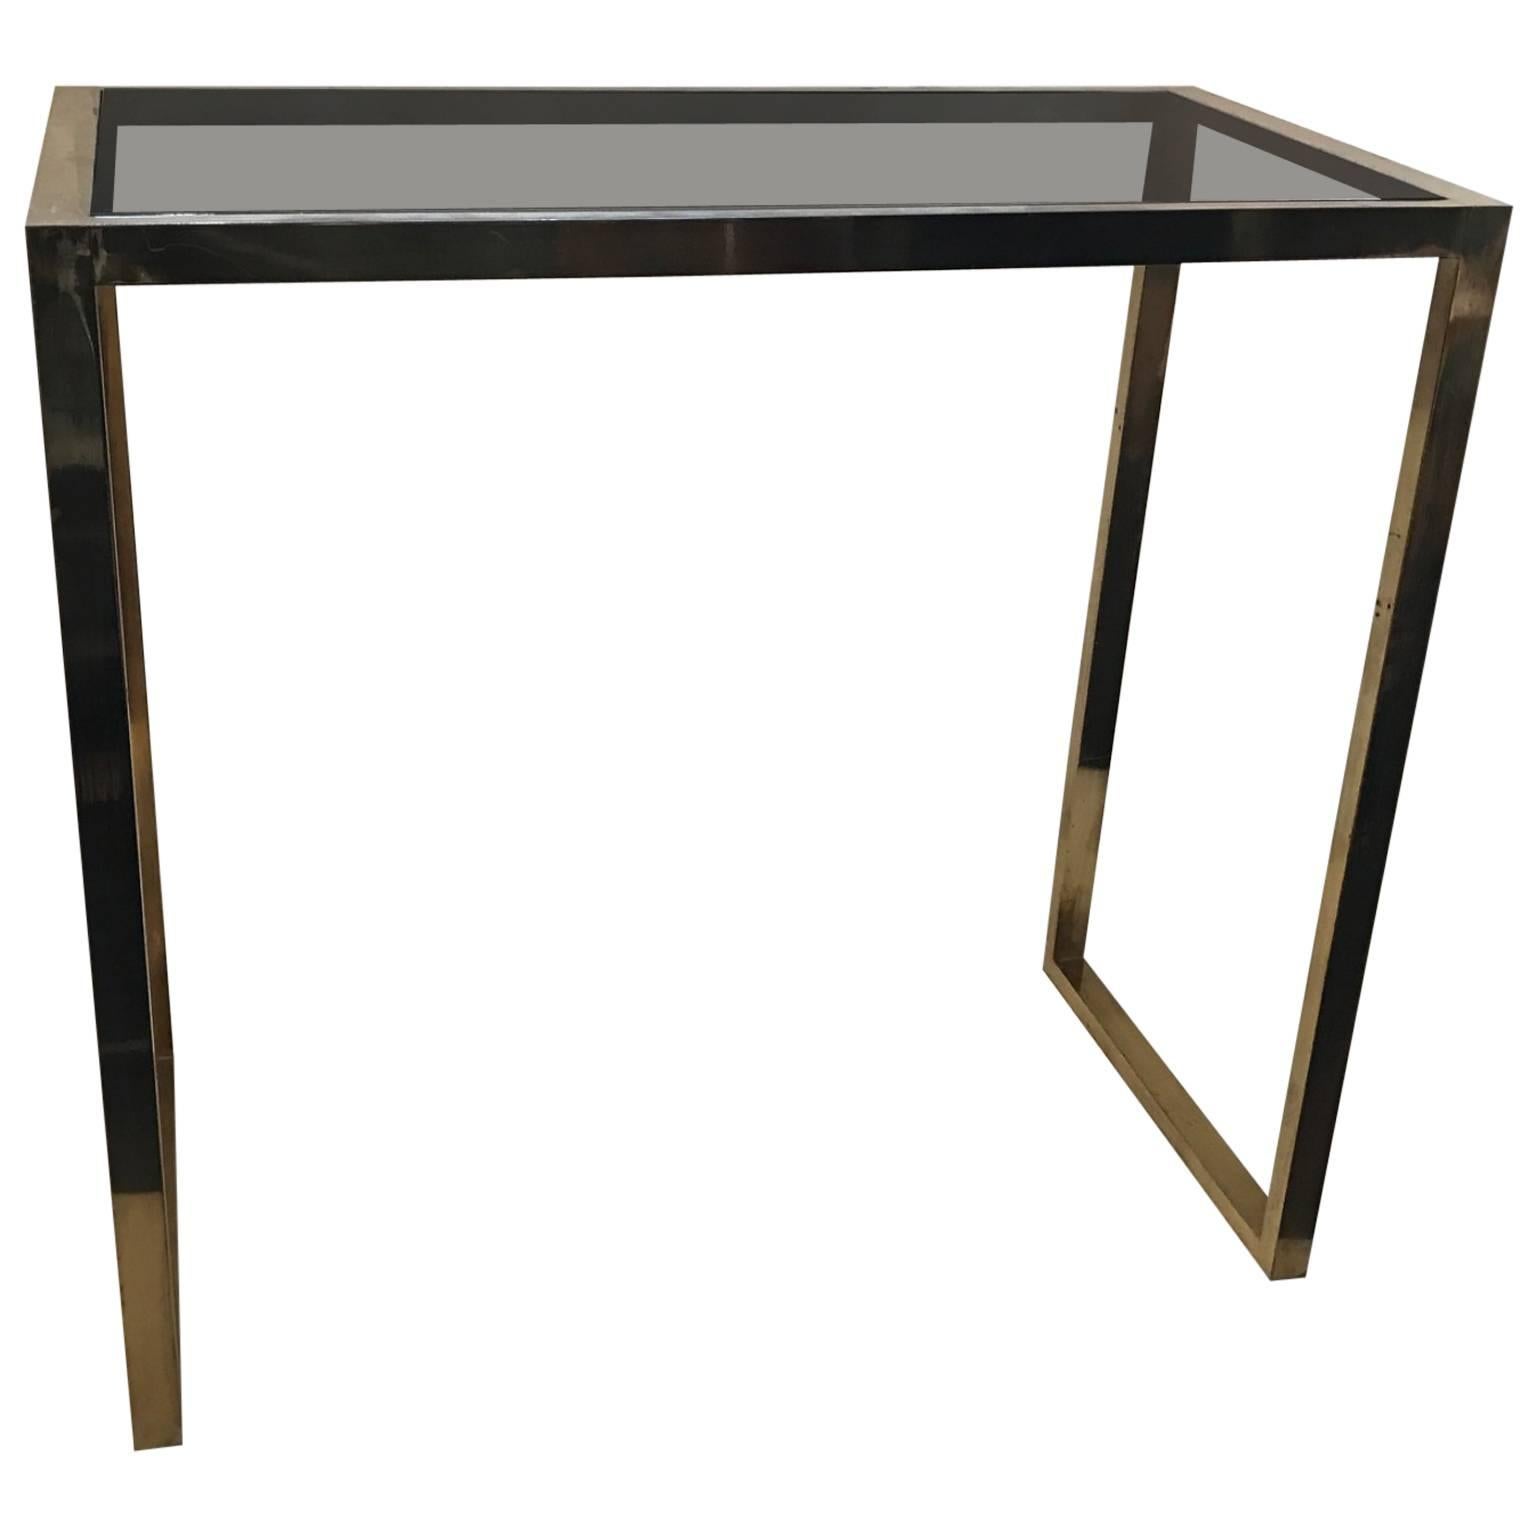 1960s Italian Brass Console or Table